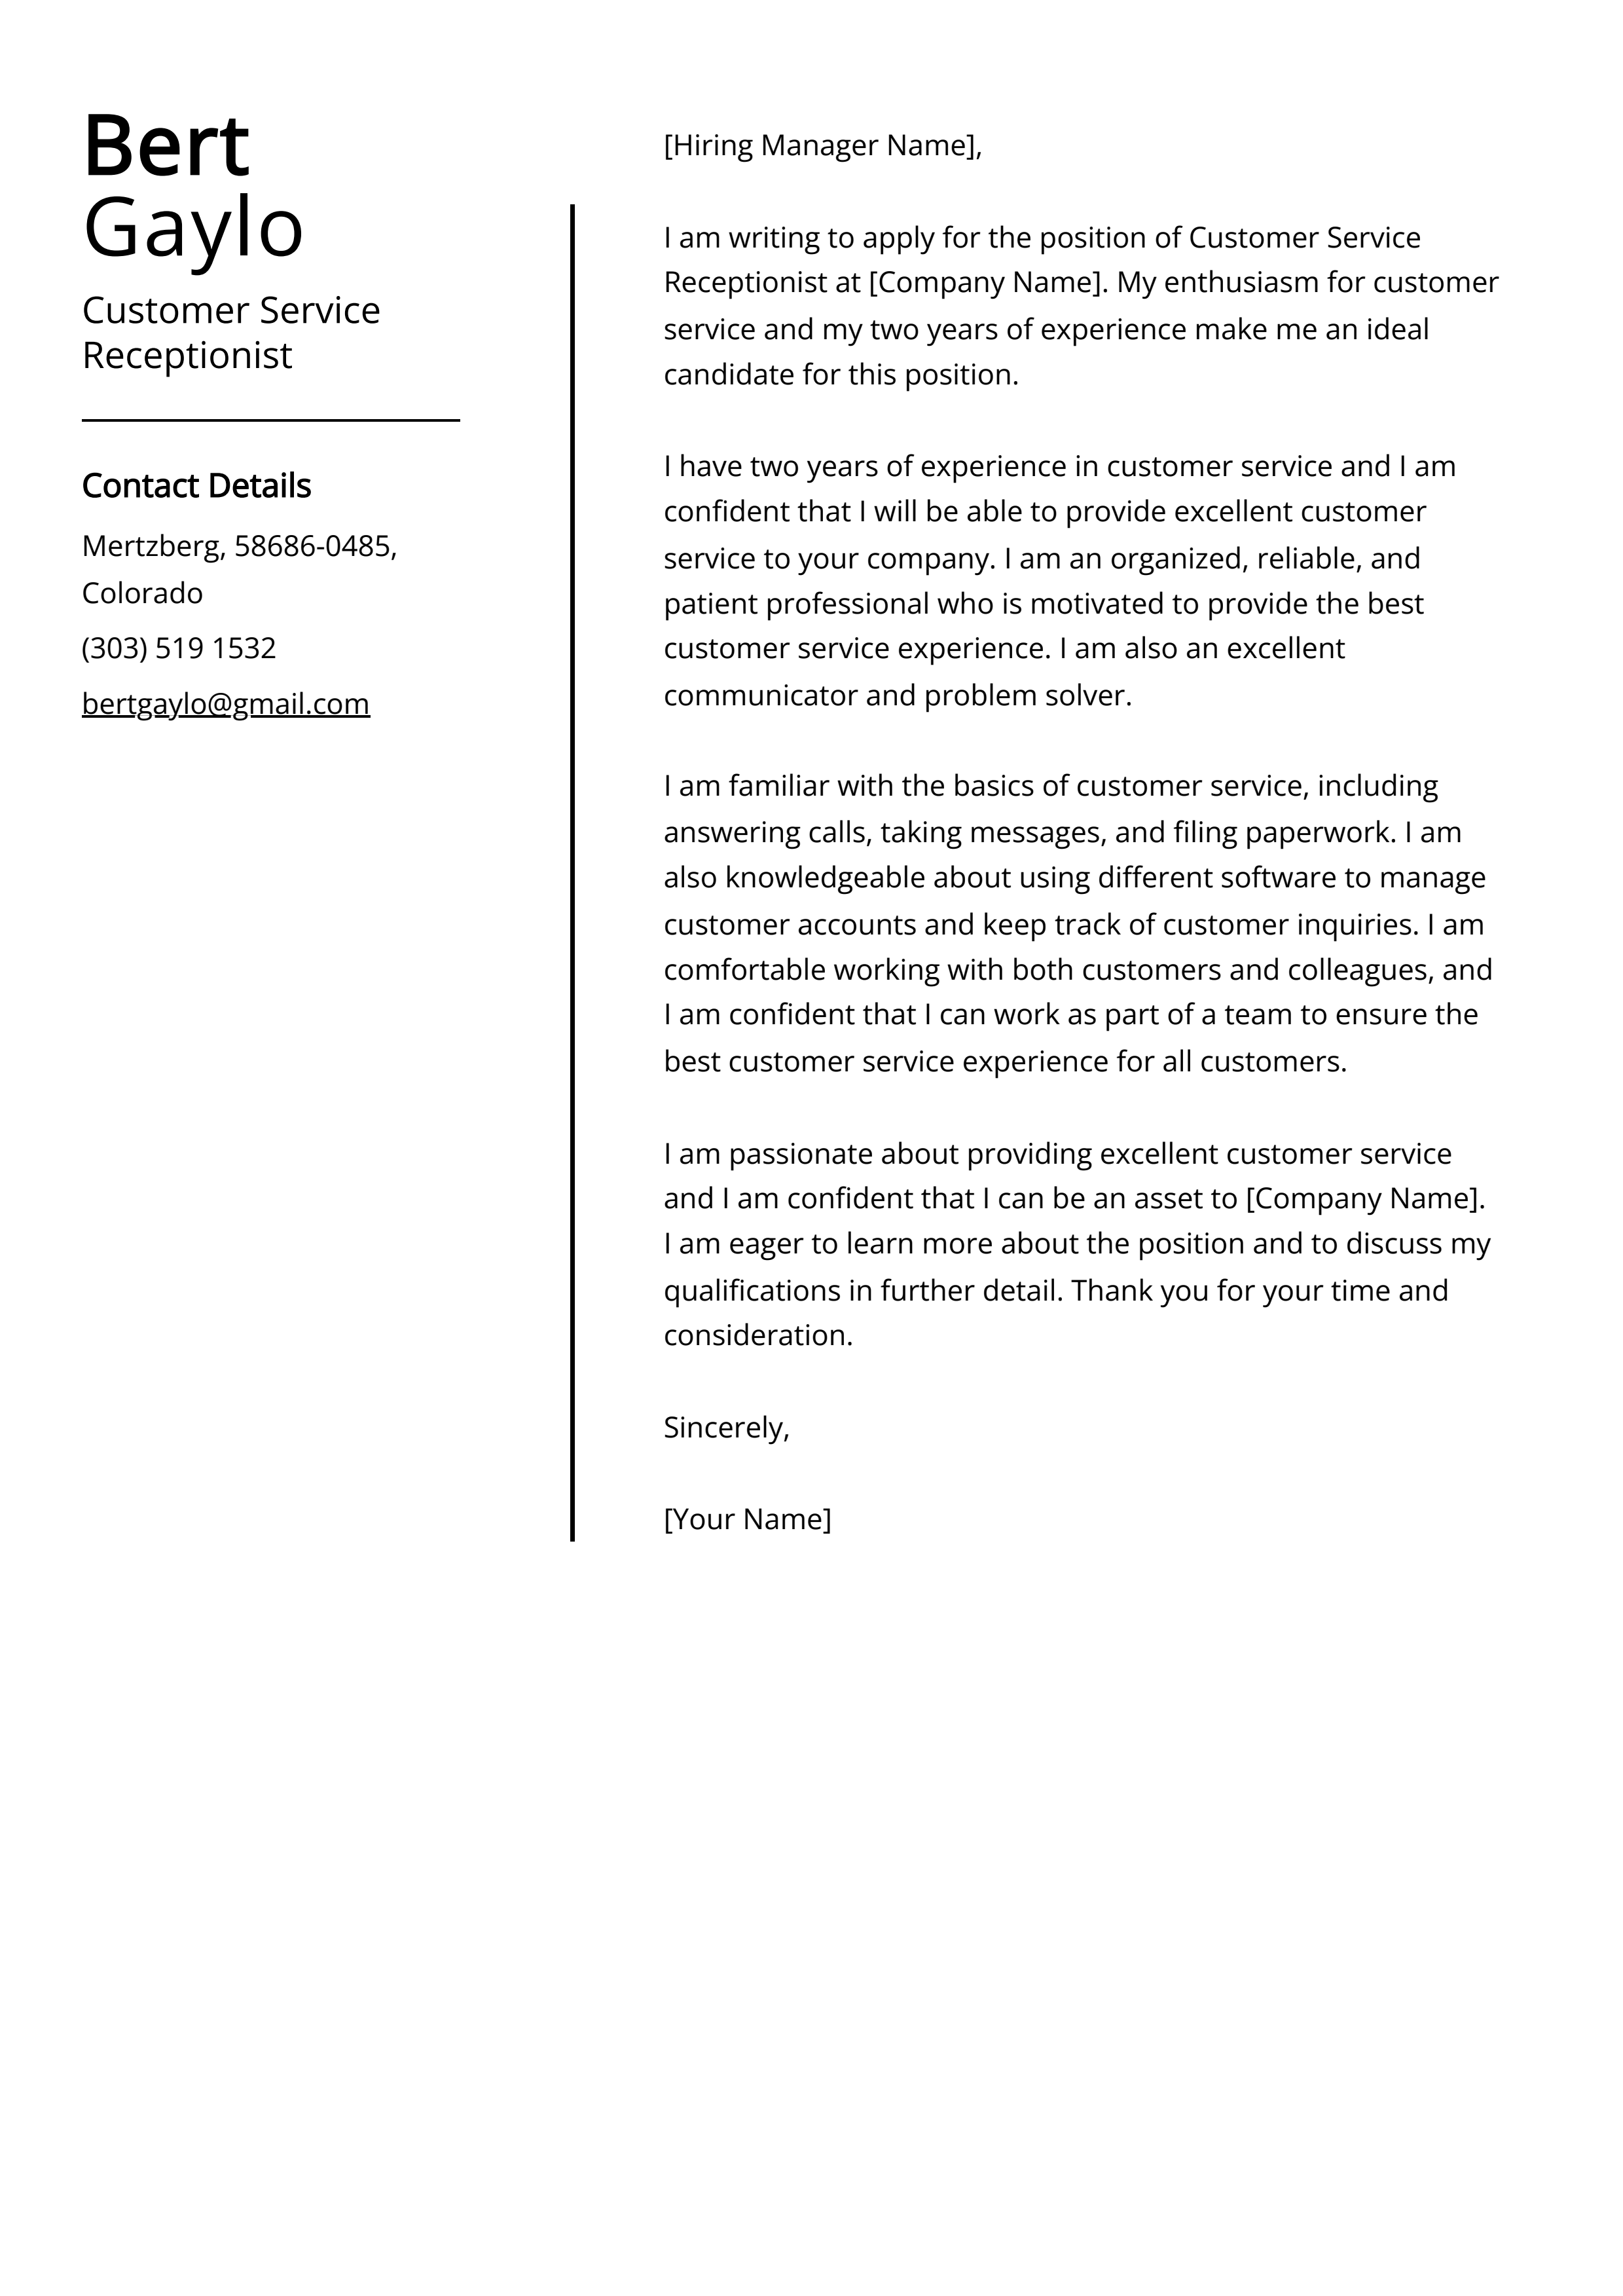 Customer Service Receptionist Cover Letter Example